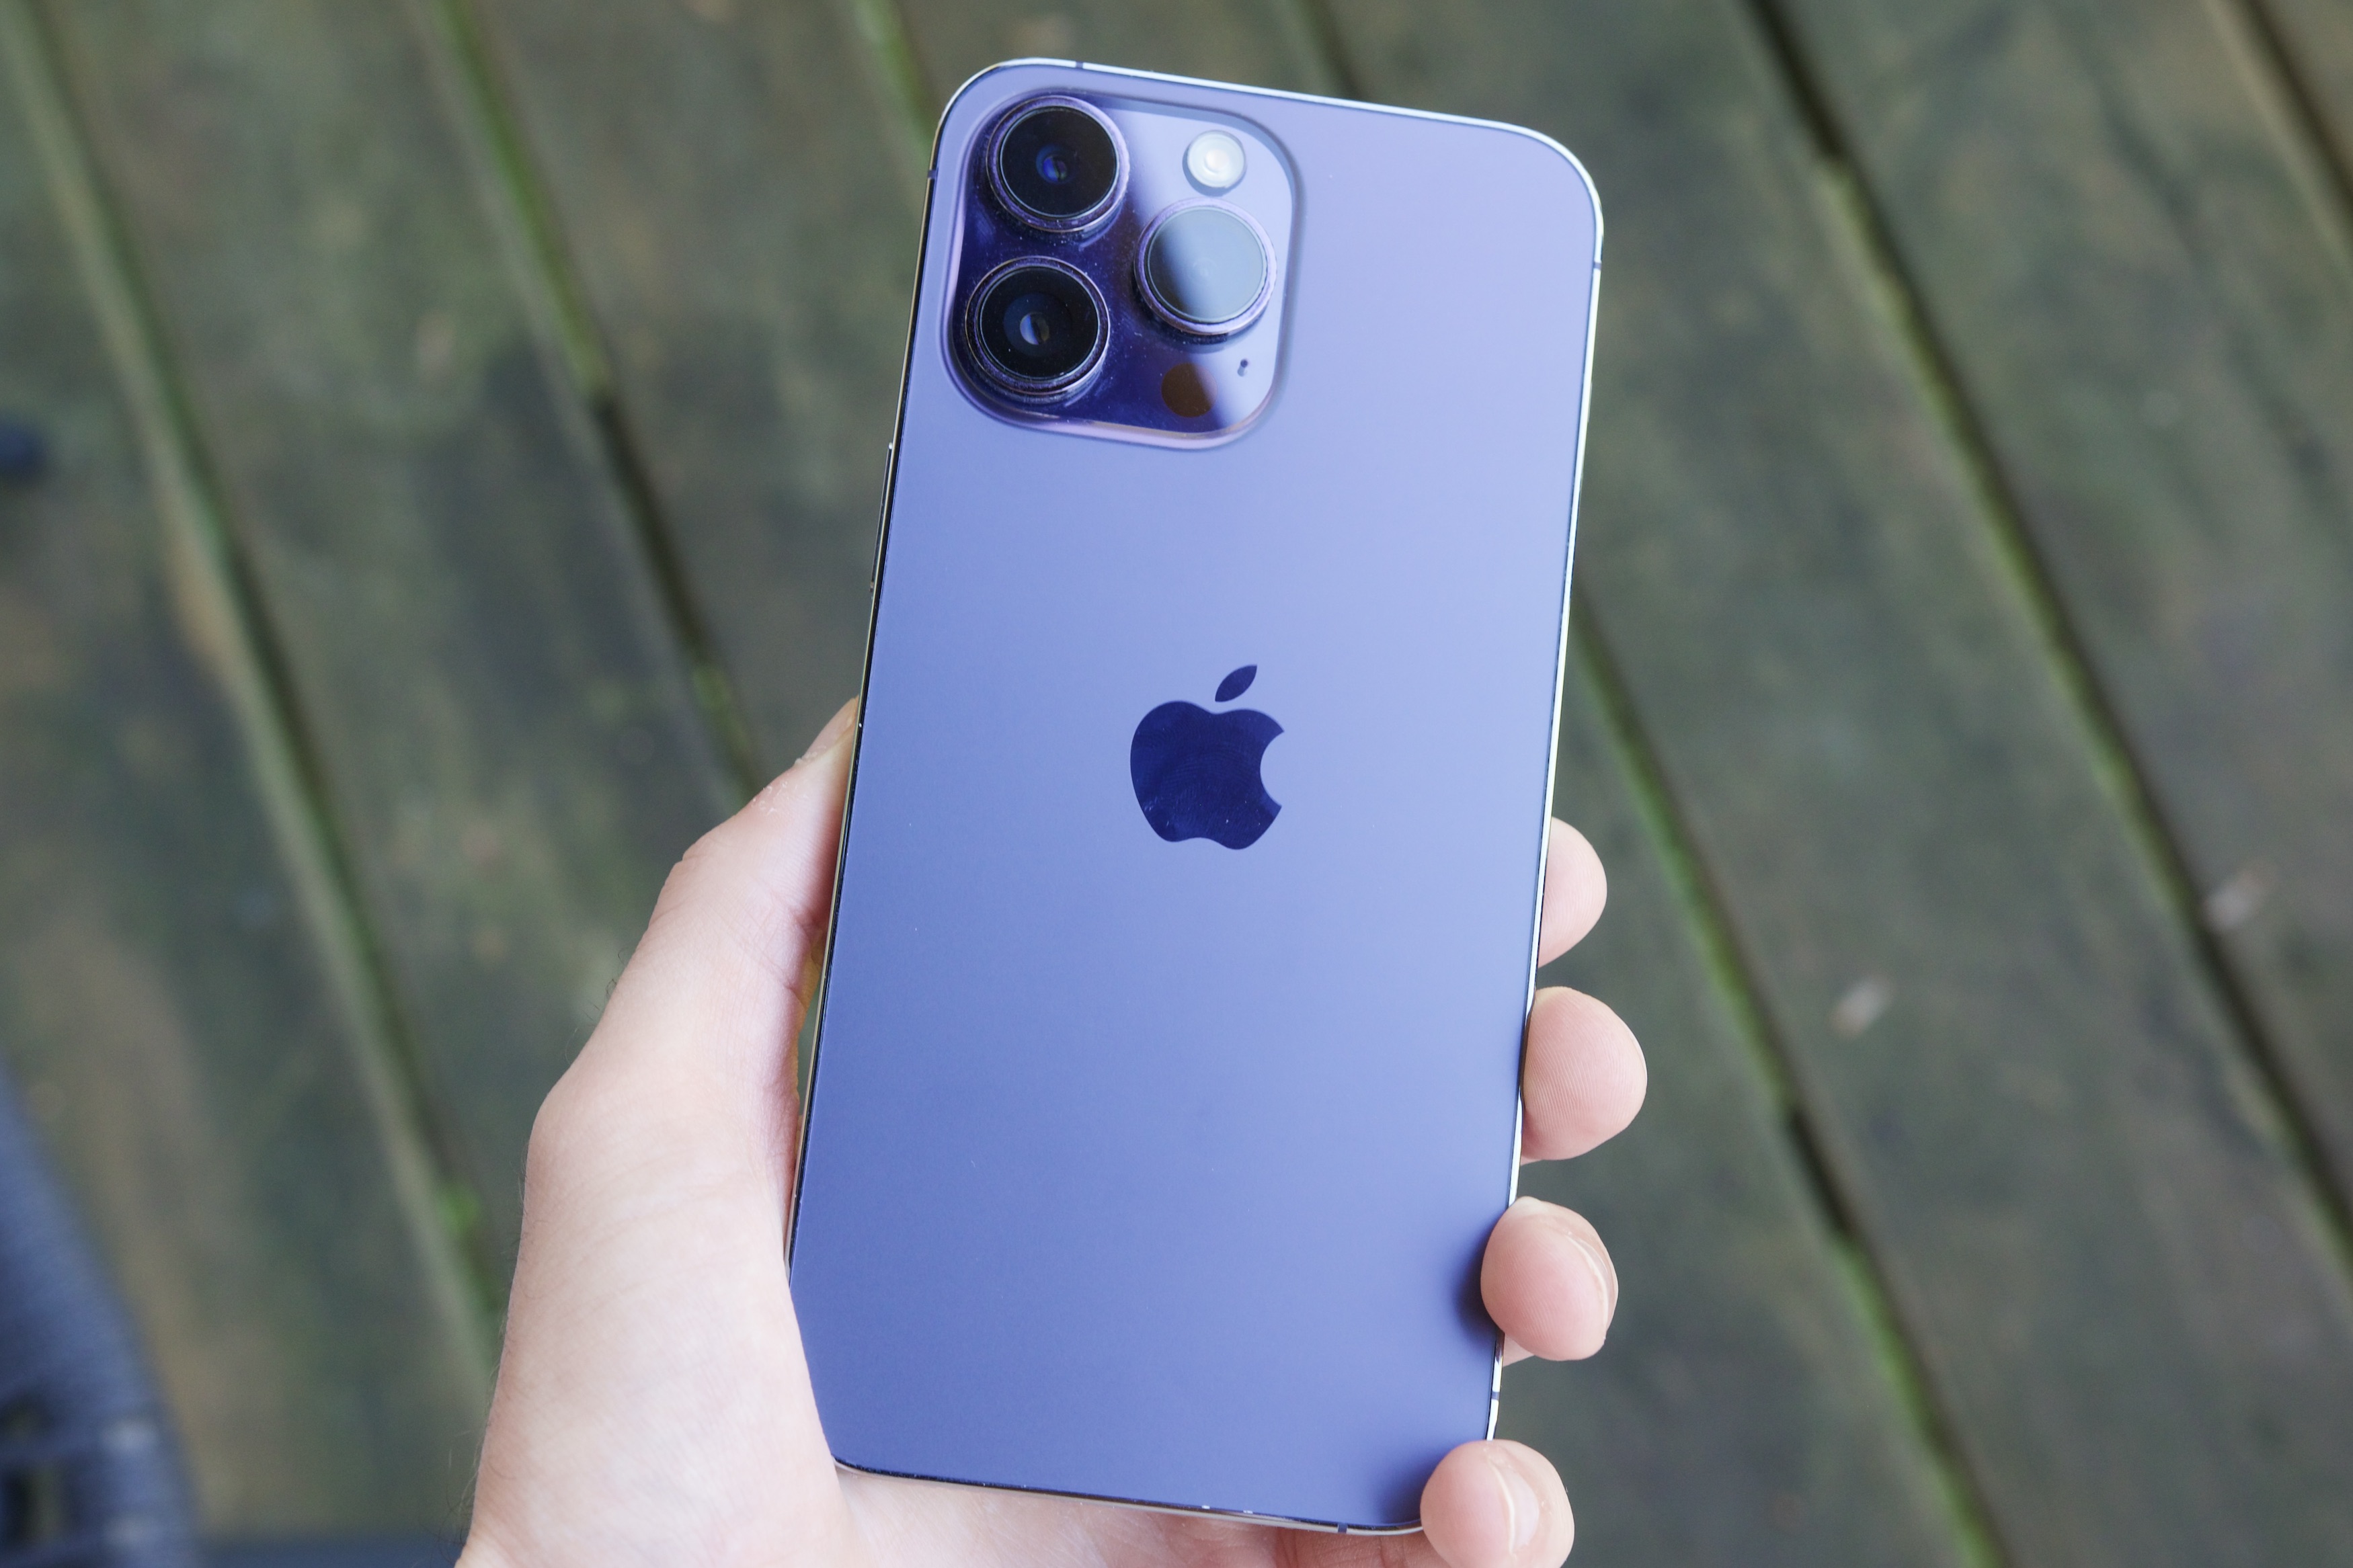 What to expect from the iPhone 14 and iPhone 14 Max